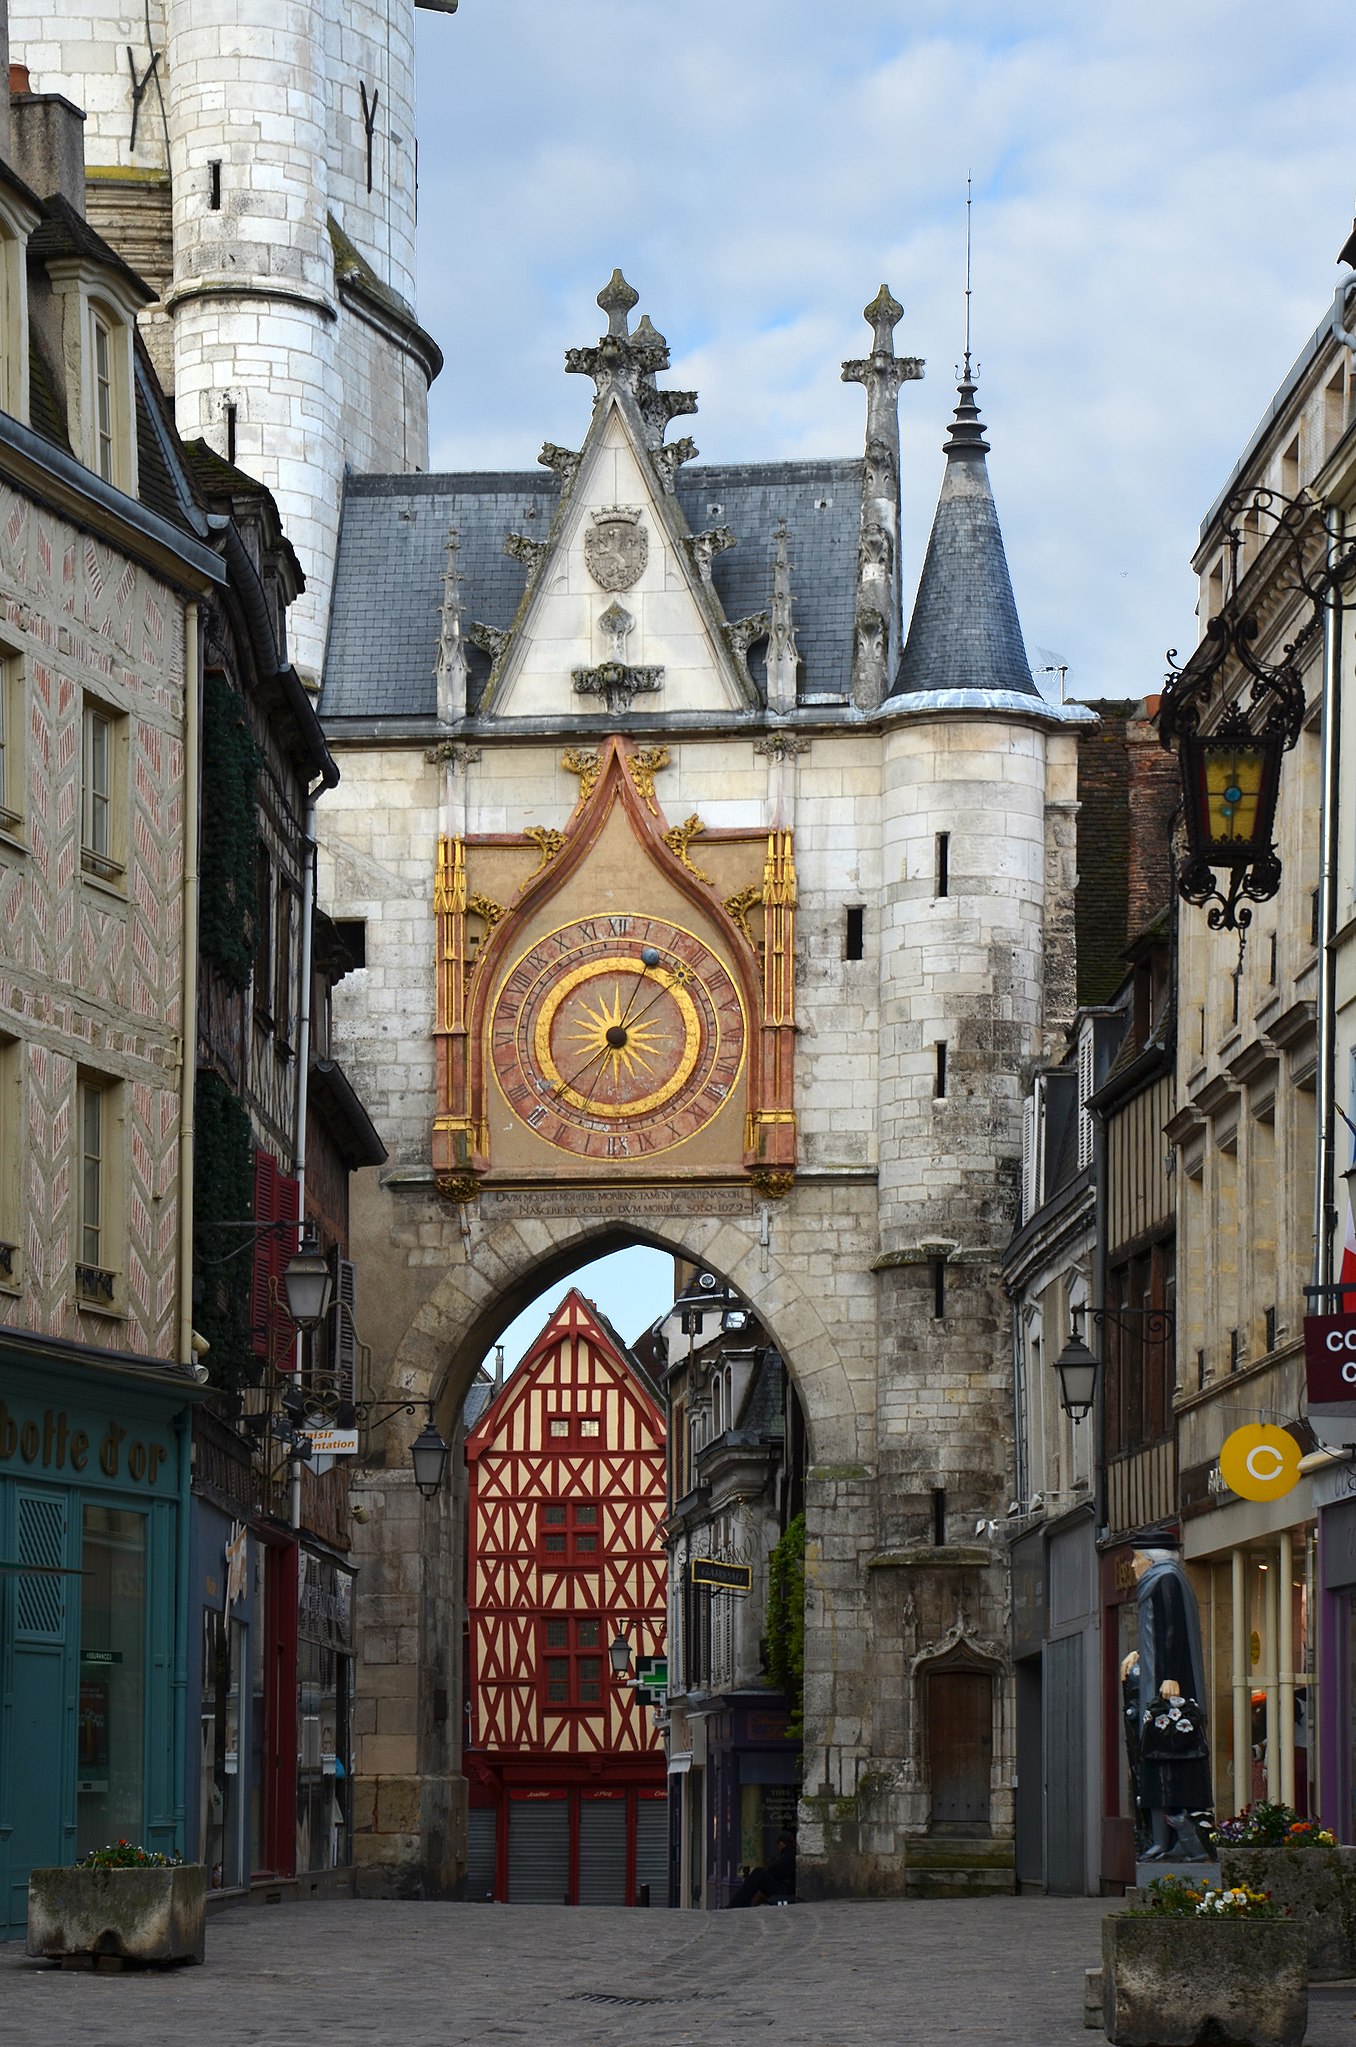 Architecture Building Urban Street City Clock Tower Clocks Portrait Display France Old Building Arch 1356x2047